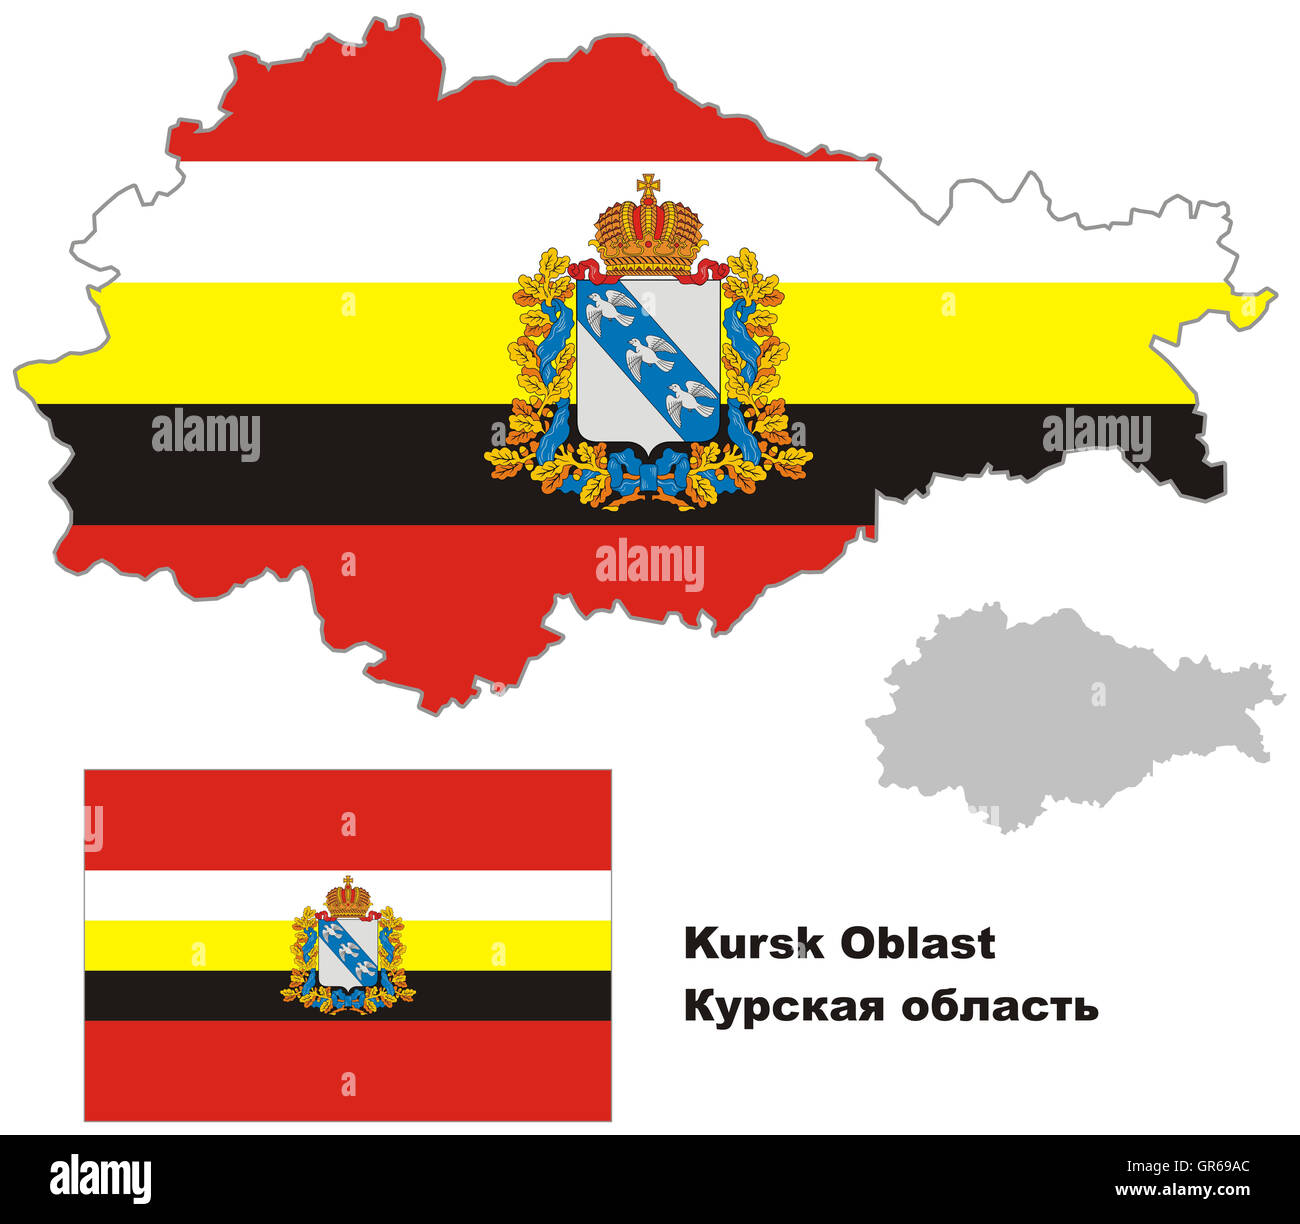 Outline map of Kursk Oblast with flag. Regions of Russia. Vector illustration. Stock Photo